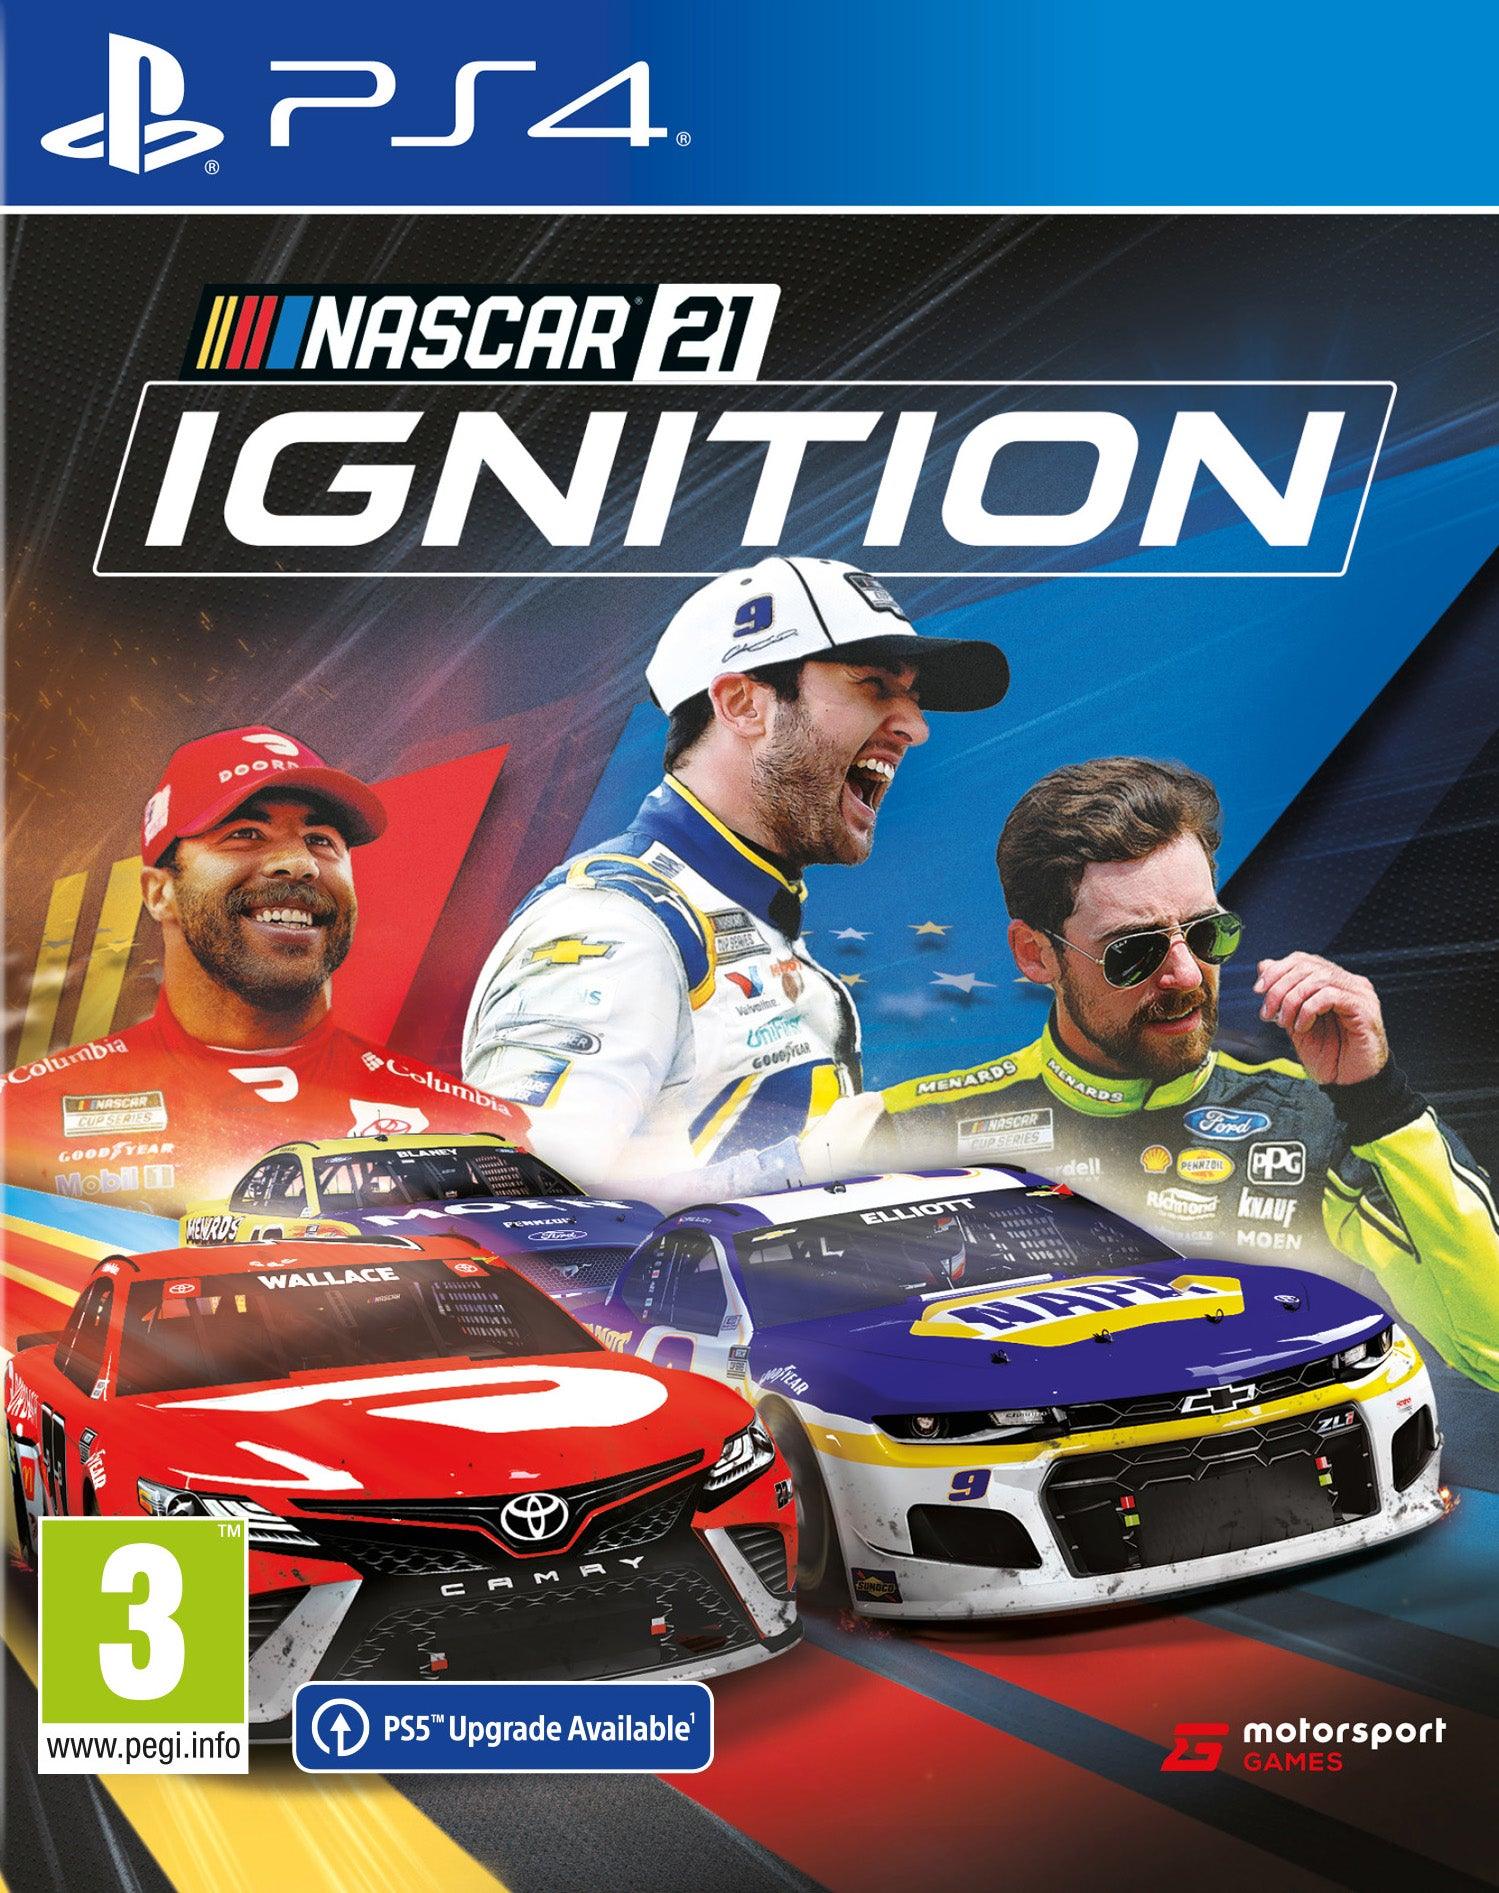 Nascar 21 Ignition - Want a New Gadget